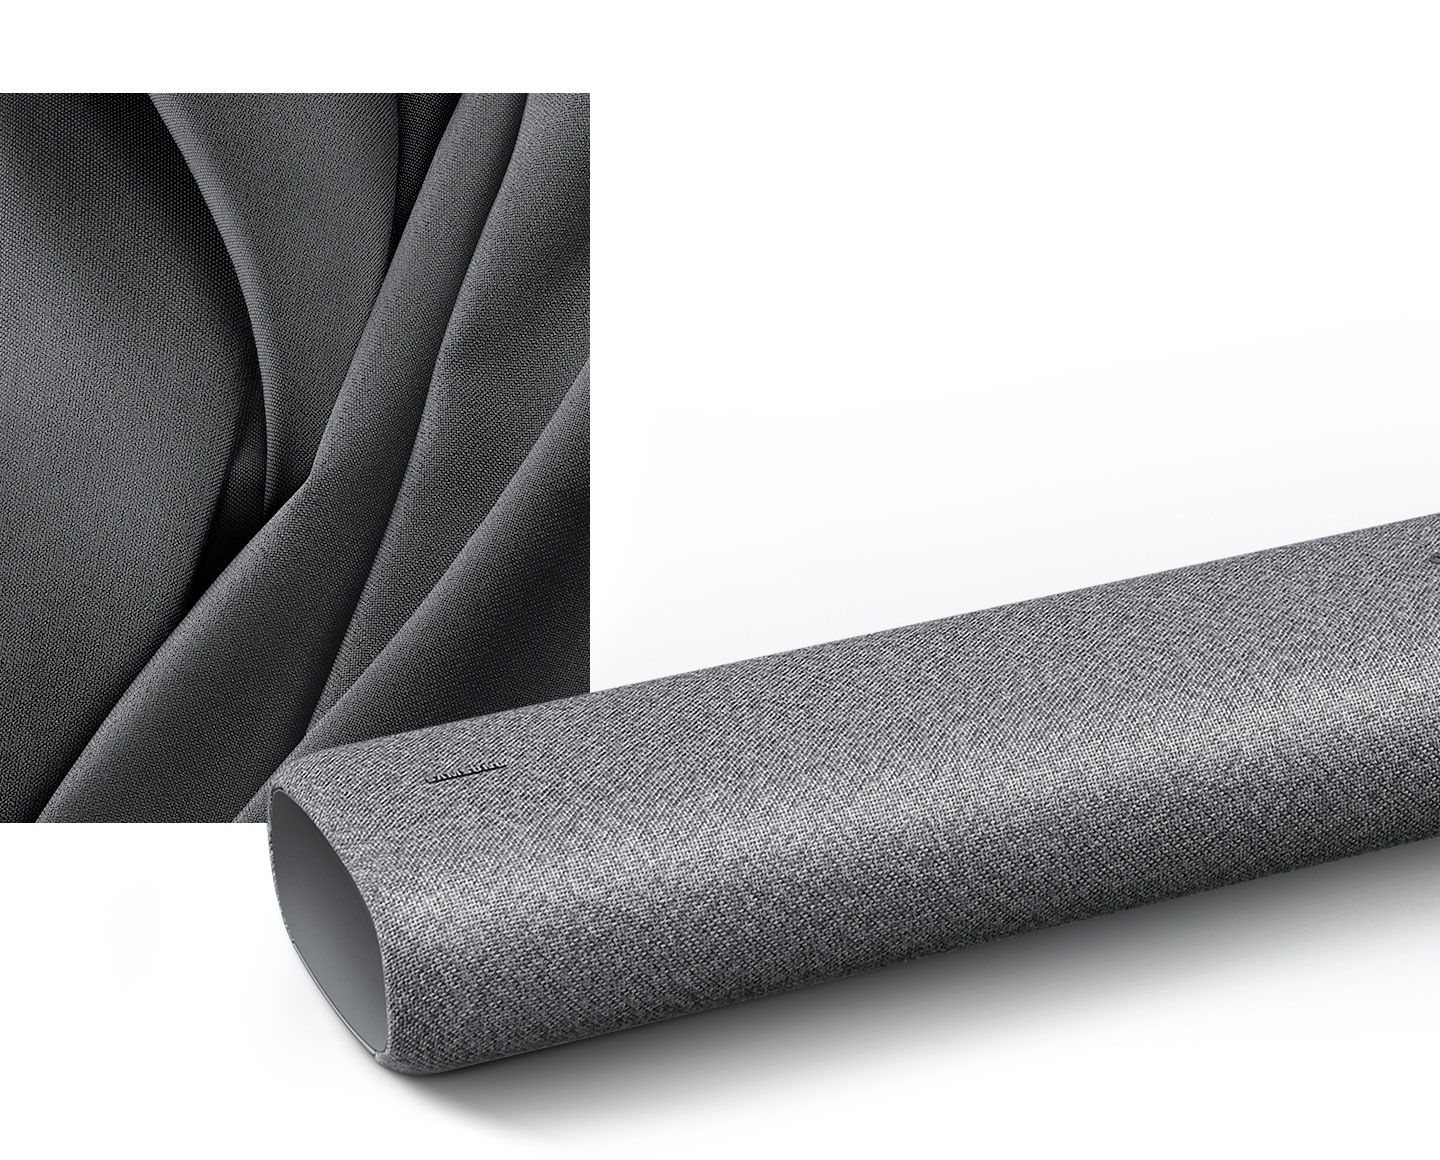 Closeup image of dark fabric material illustrates premium fabric design of S50A soundbar which is shown in front with Samsung logo visible.